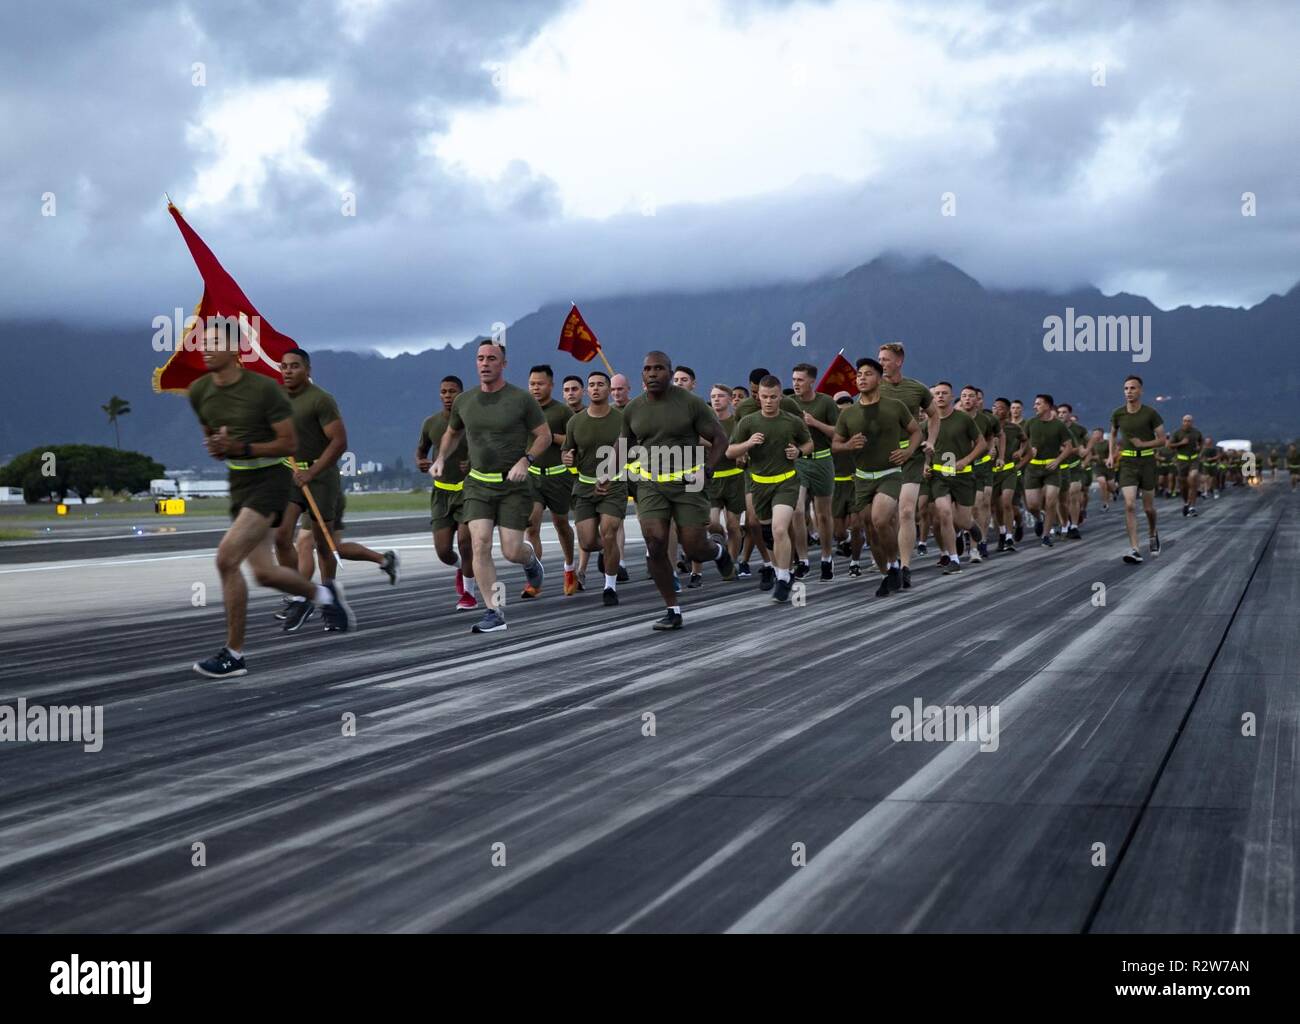 U.S. Marines and Sailors with Marine Corps Air Station (MCAS) Kaneohe Bay and Headquarters Battalion, Marine Corps Base Hawaii, run the length of the MCAS Kaneohe Bay runway to celebrate the 243rd Marine Corps Birthday, Nov. 7, 2018. The birthday run was 3.4 miles and provided a rare opportunity to traverse the runway on foot. Stock Photo